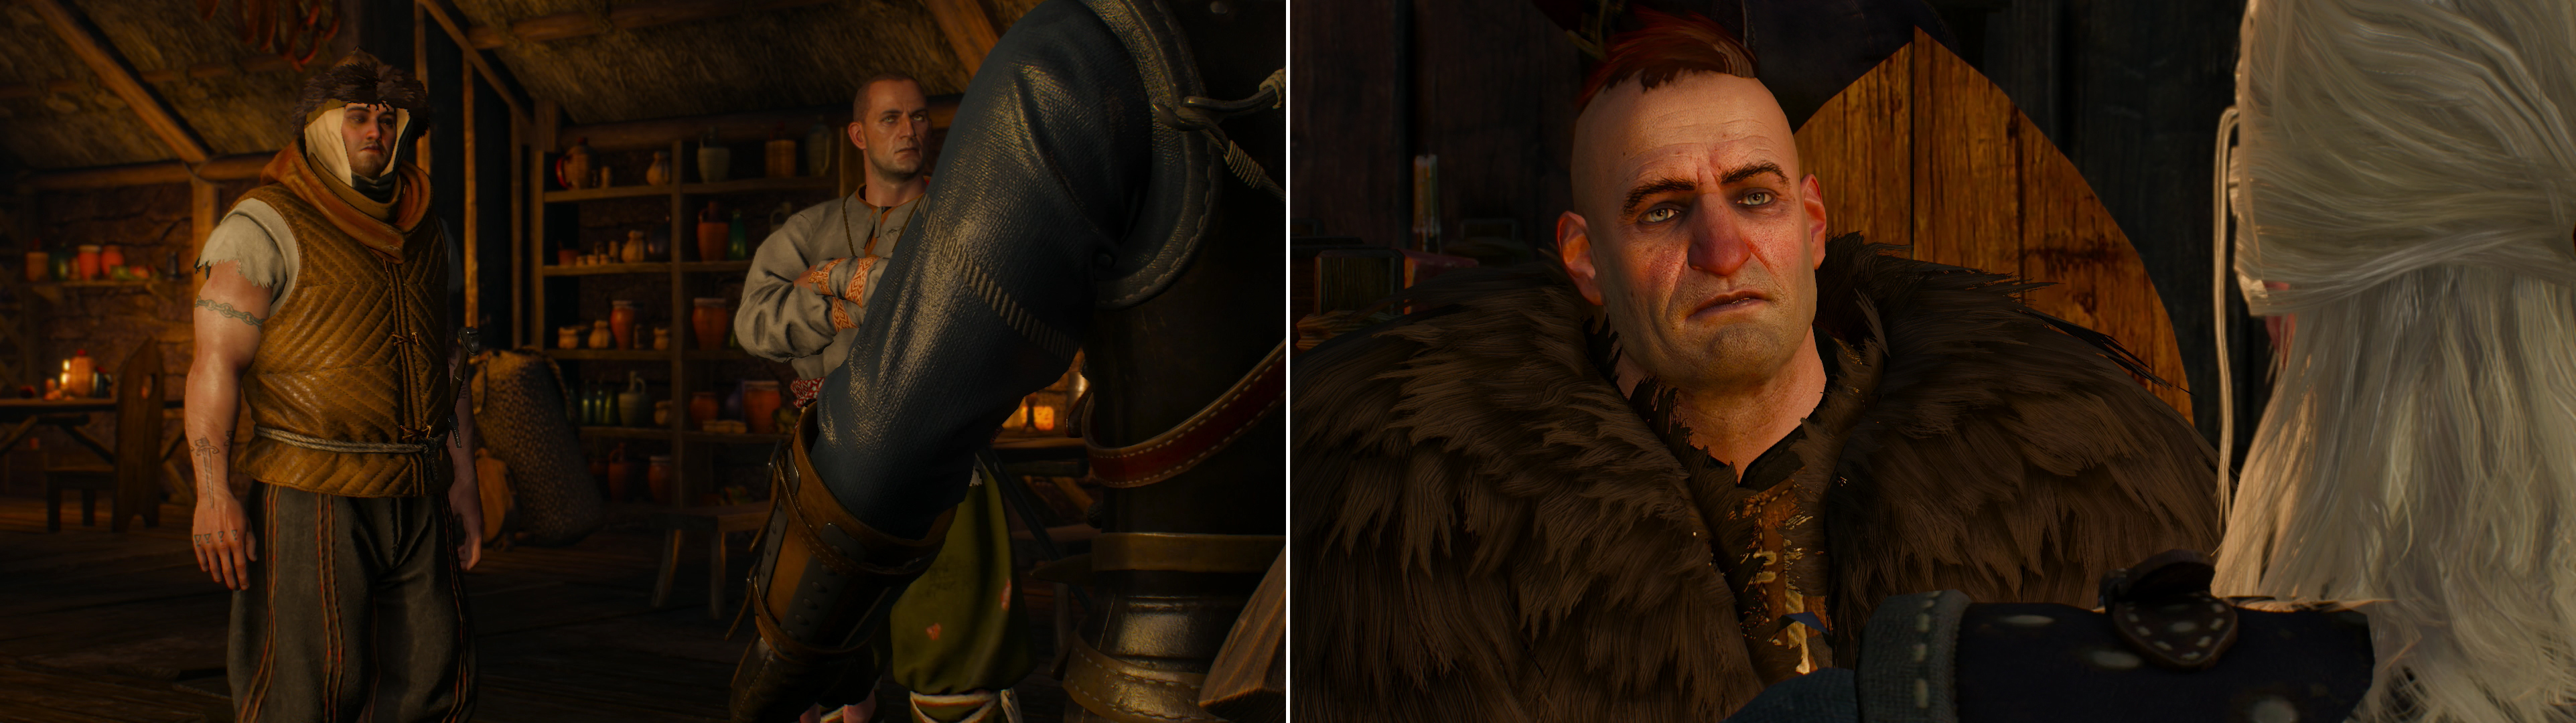 Not all Skelligers are friendly… well, most aren't, really, but some are even more unfriendly than others (left). A voice of reason in the form of a Skelliger named Jorund can be found, however (right).